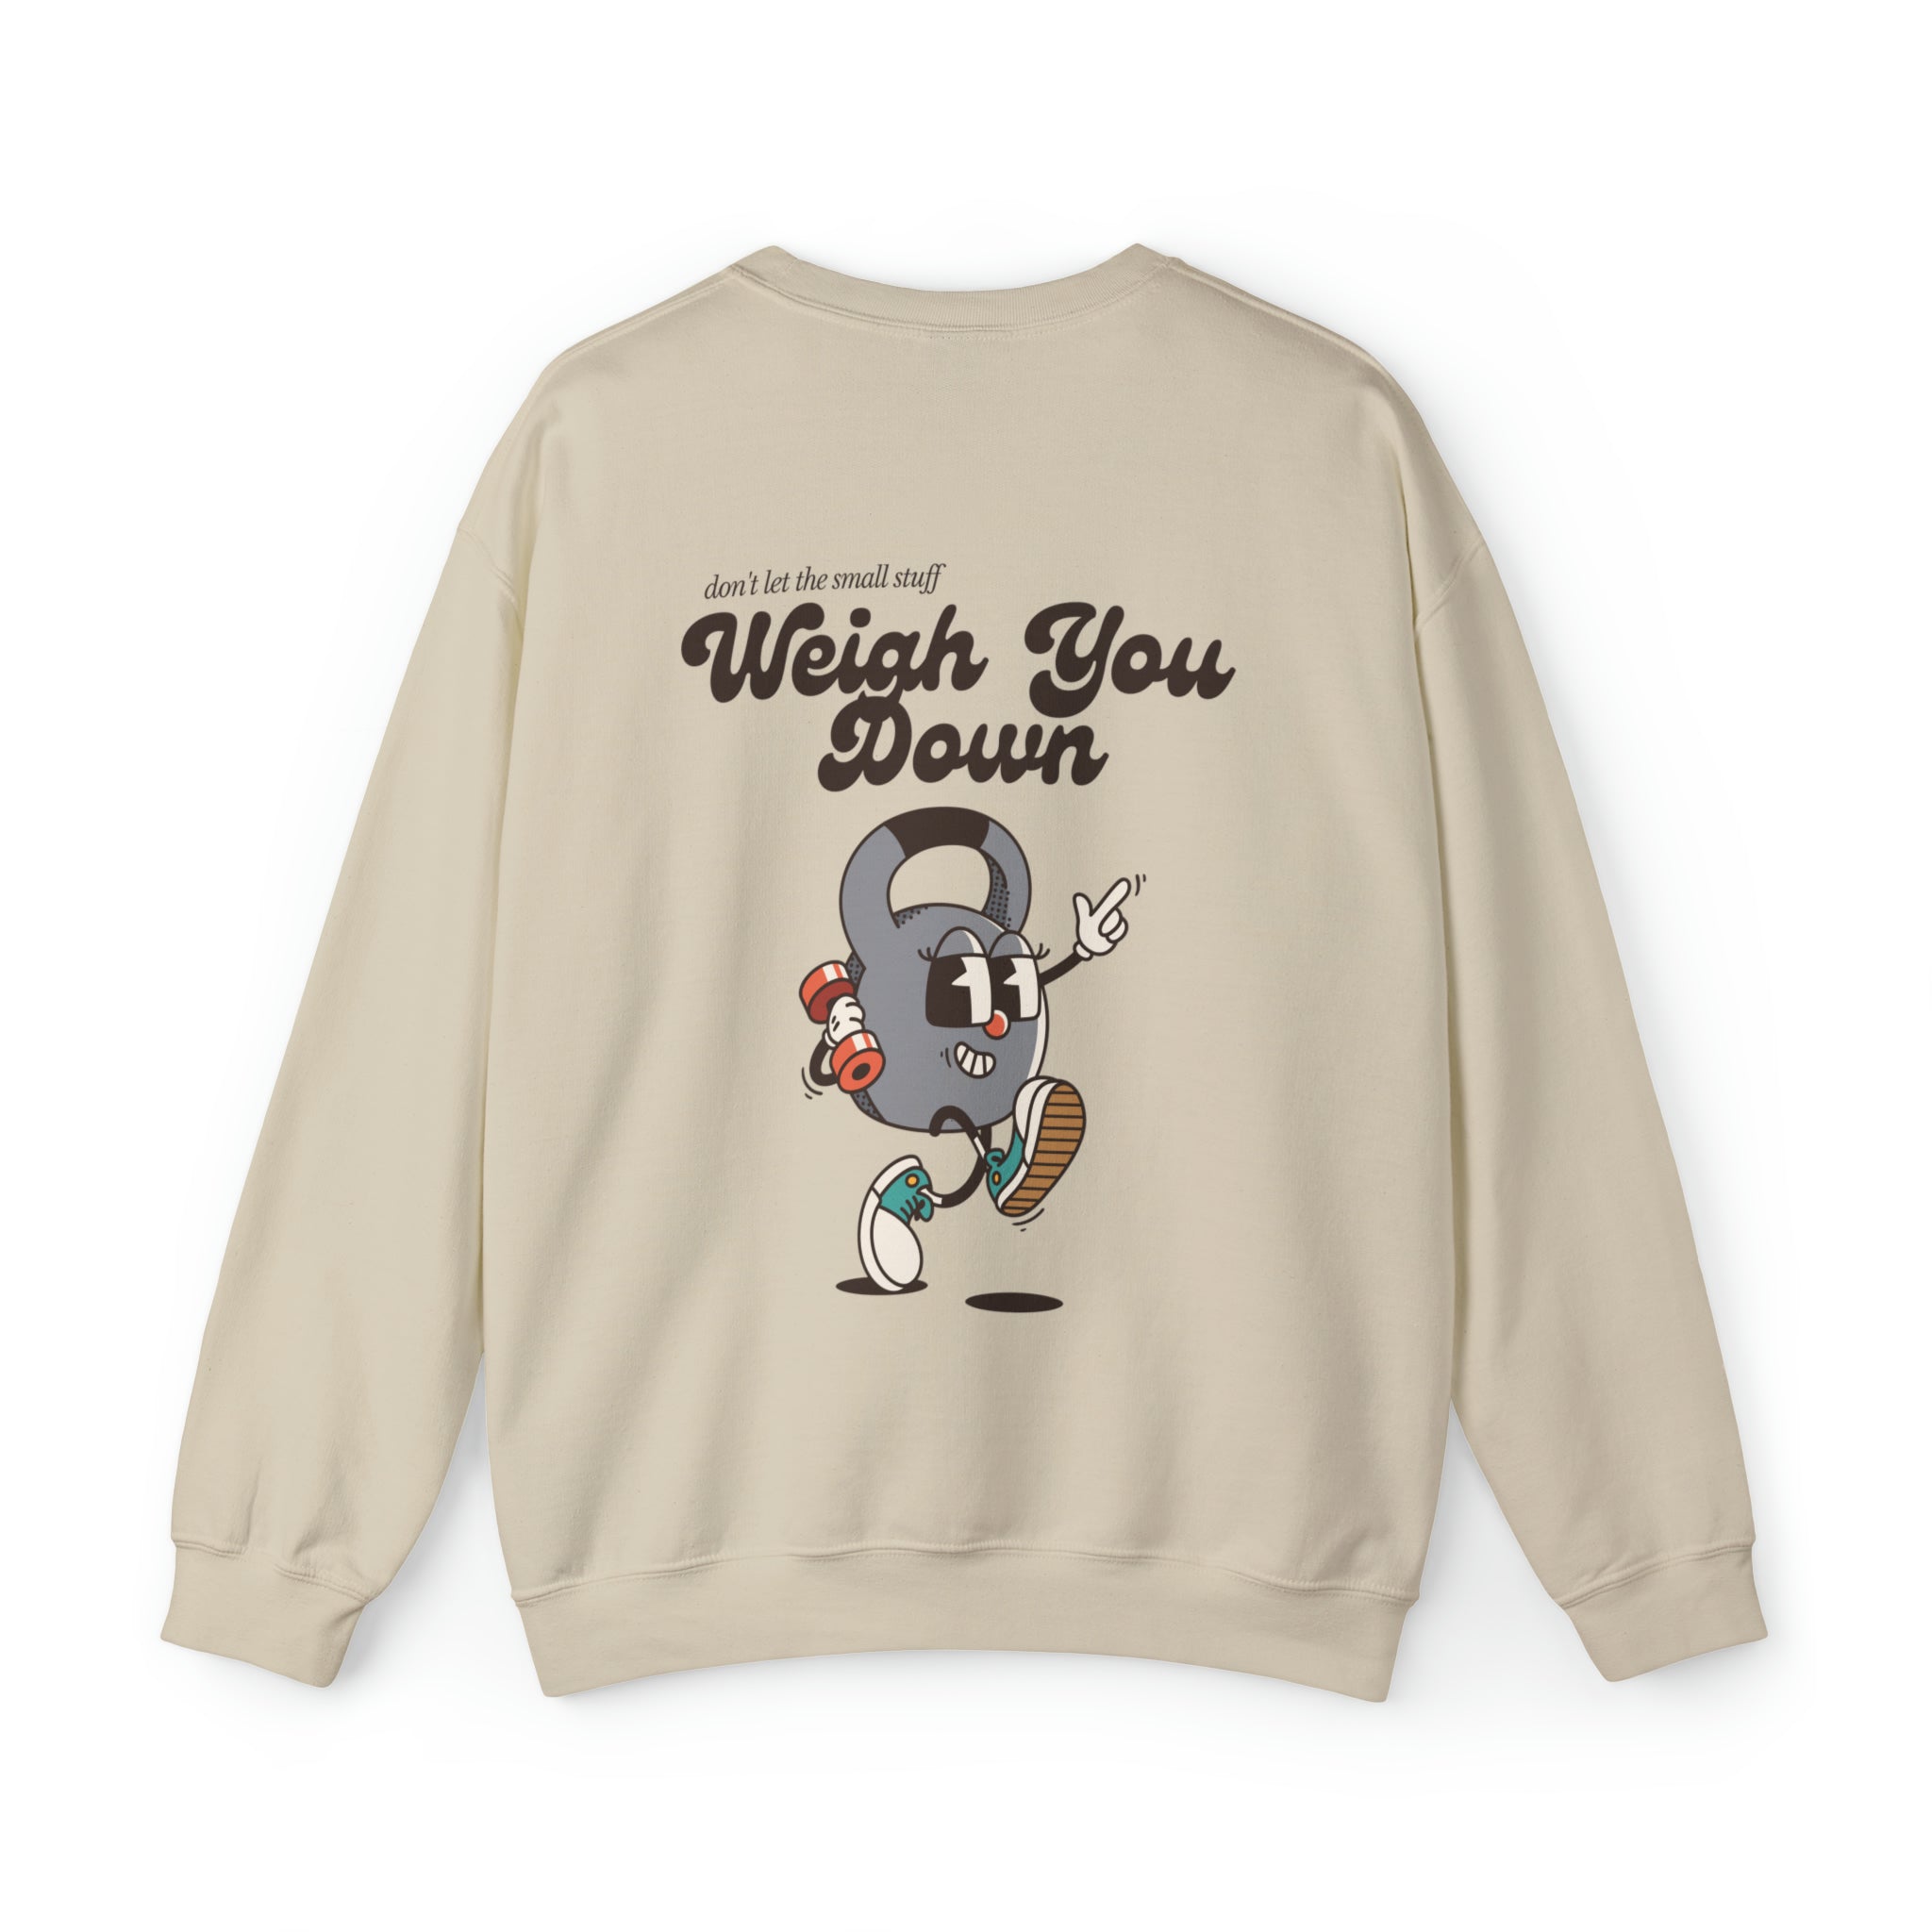 Don't Let the Small Stuff Weigh You Down Crewneck Sweatshirt